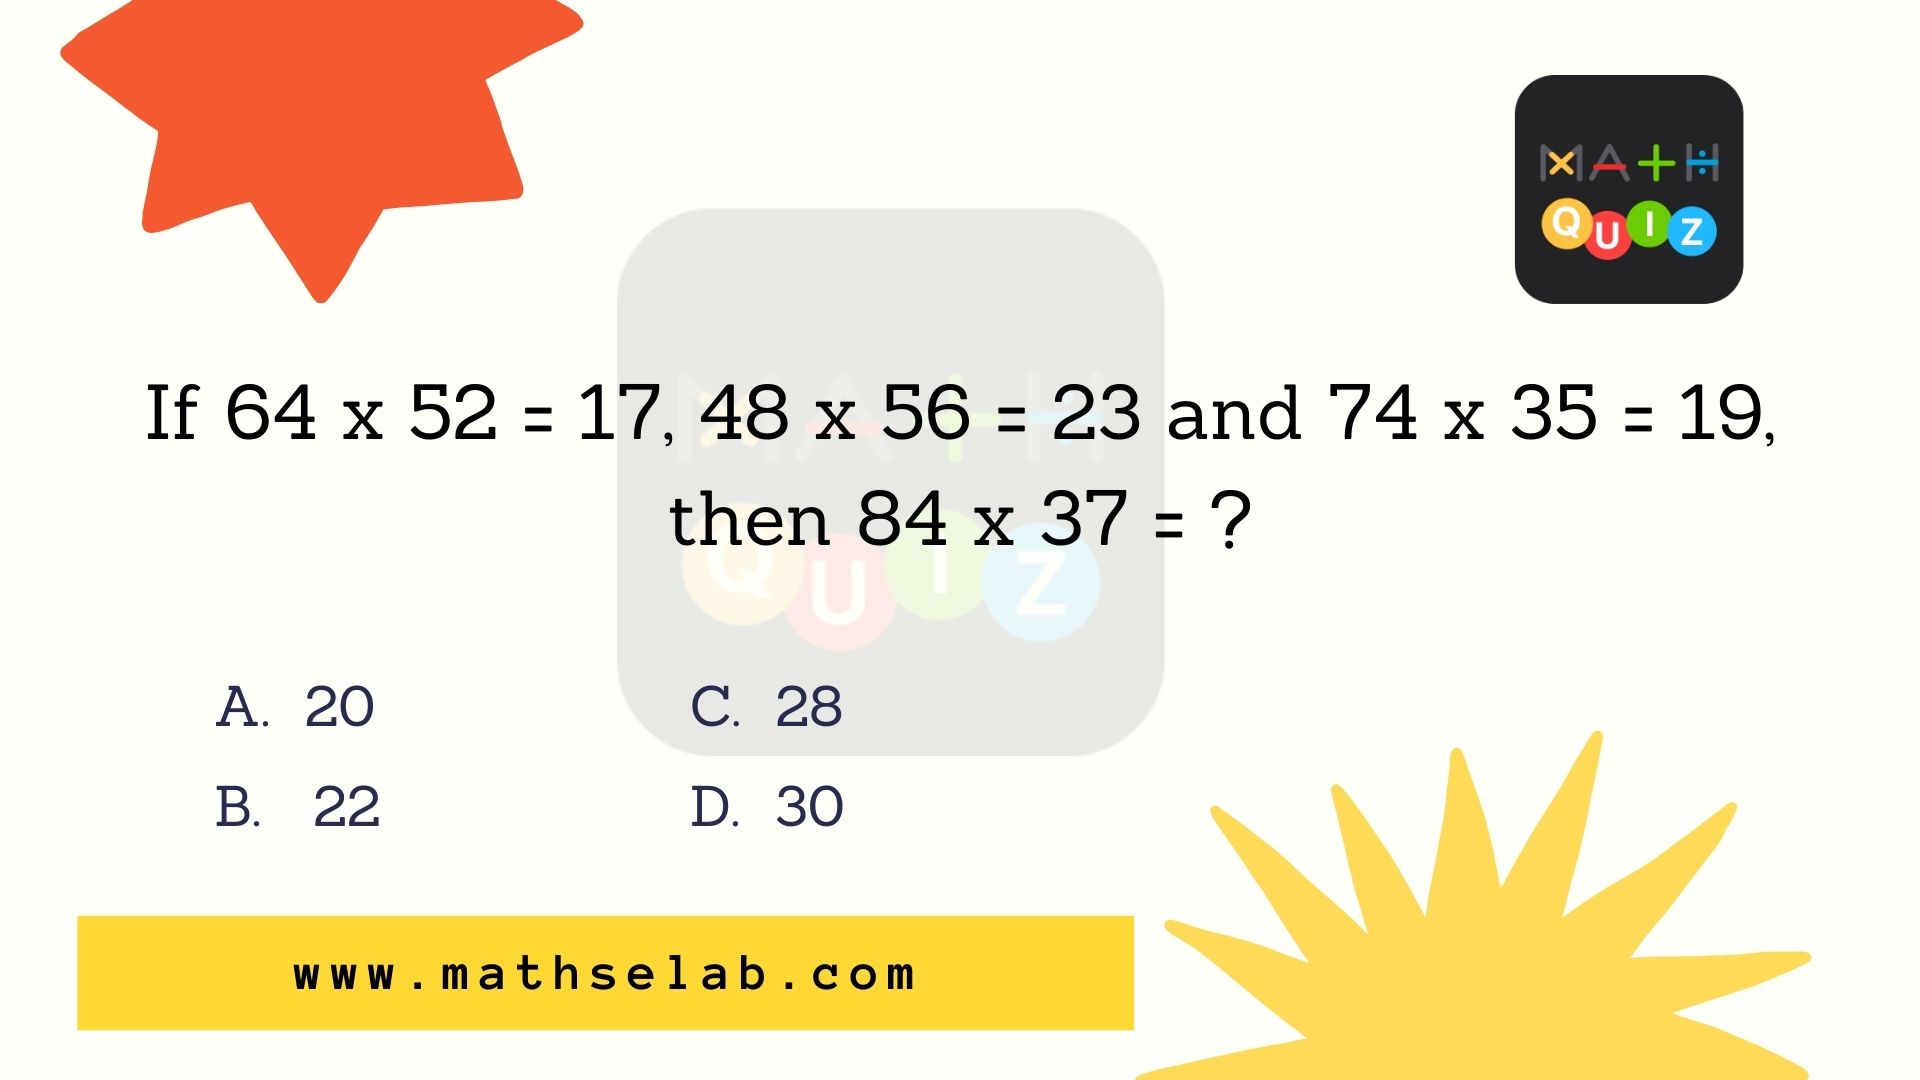 If 64 x 52 = 17, 48 x 56 = 23 and 74 x 35 = 19, then 84 x 37 = ? - mathselab.com